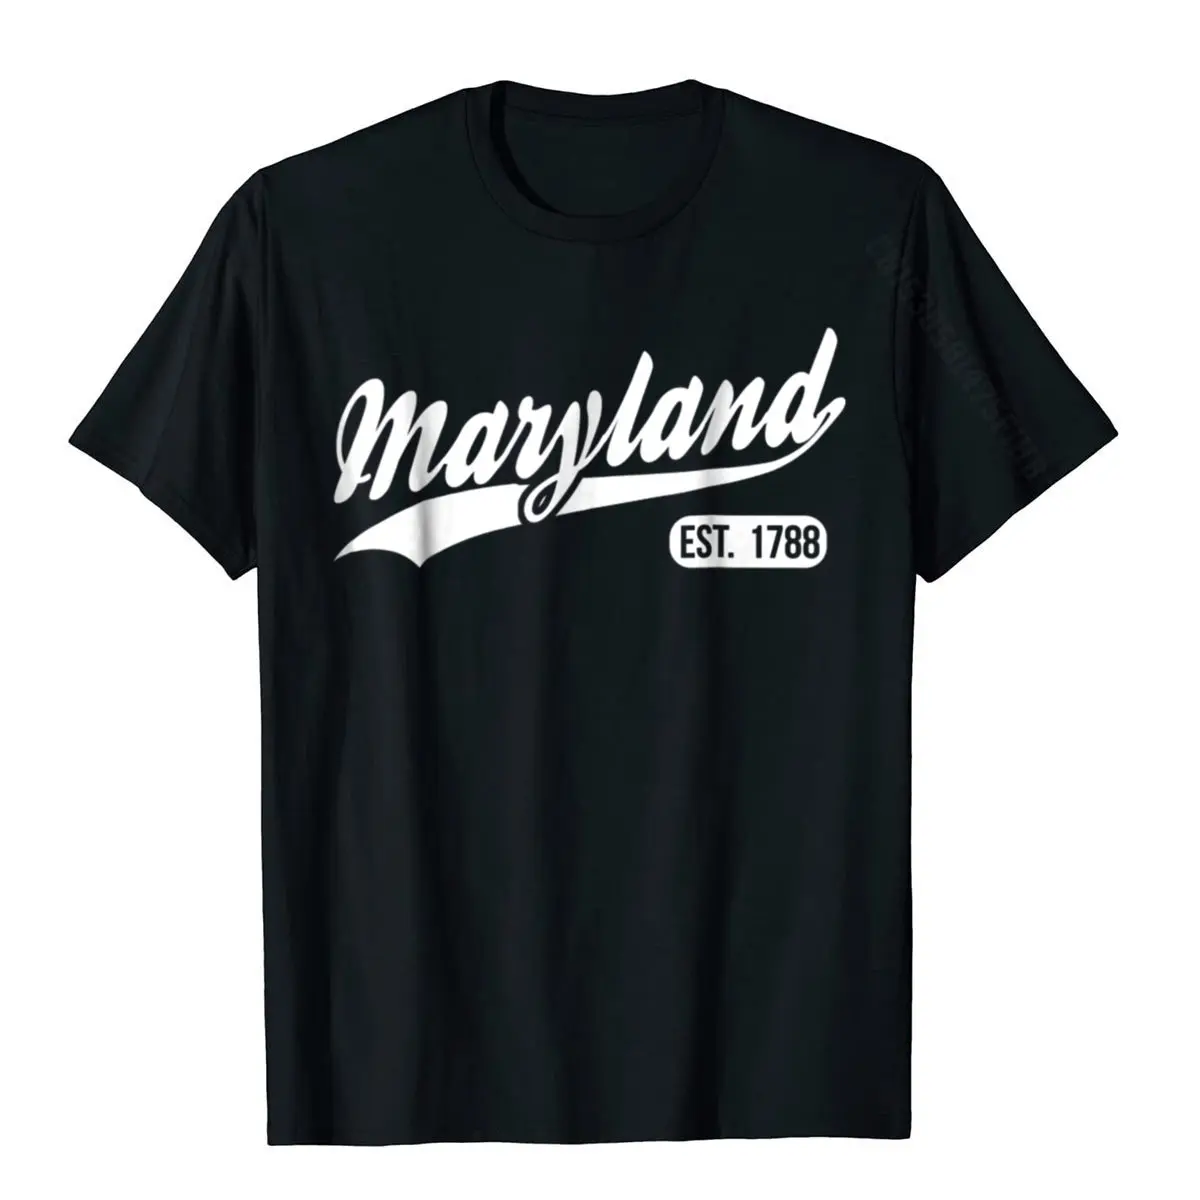 Vintage Maryland State Map T-Shirt Maryland Home Shirt Wholesale Men's Tshirts Cotton Tops Tees Birthday